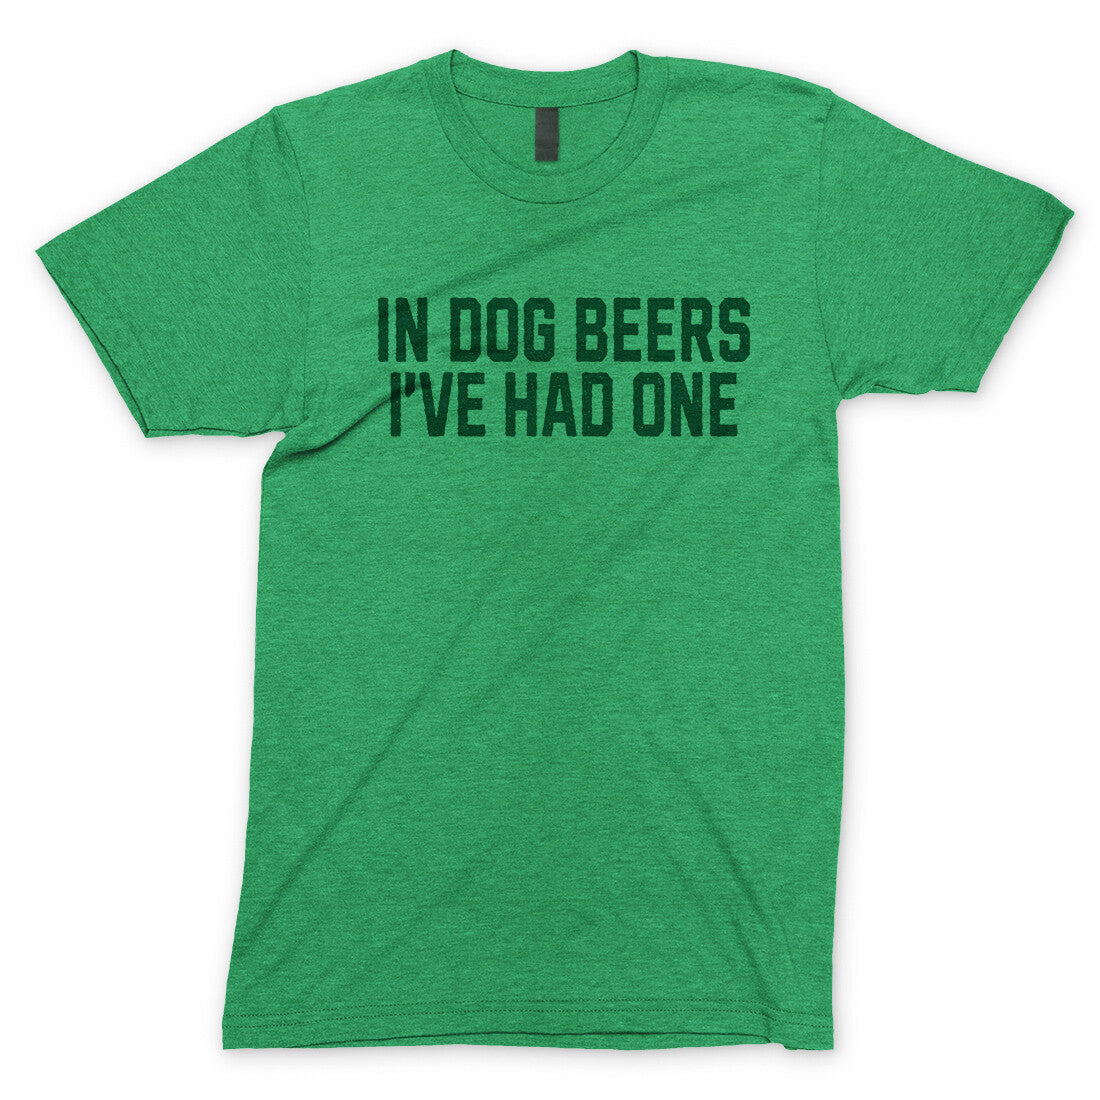 In Dog Beers I've Had One in Heather Irish Green Color